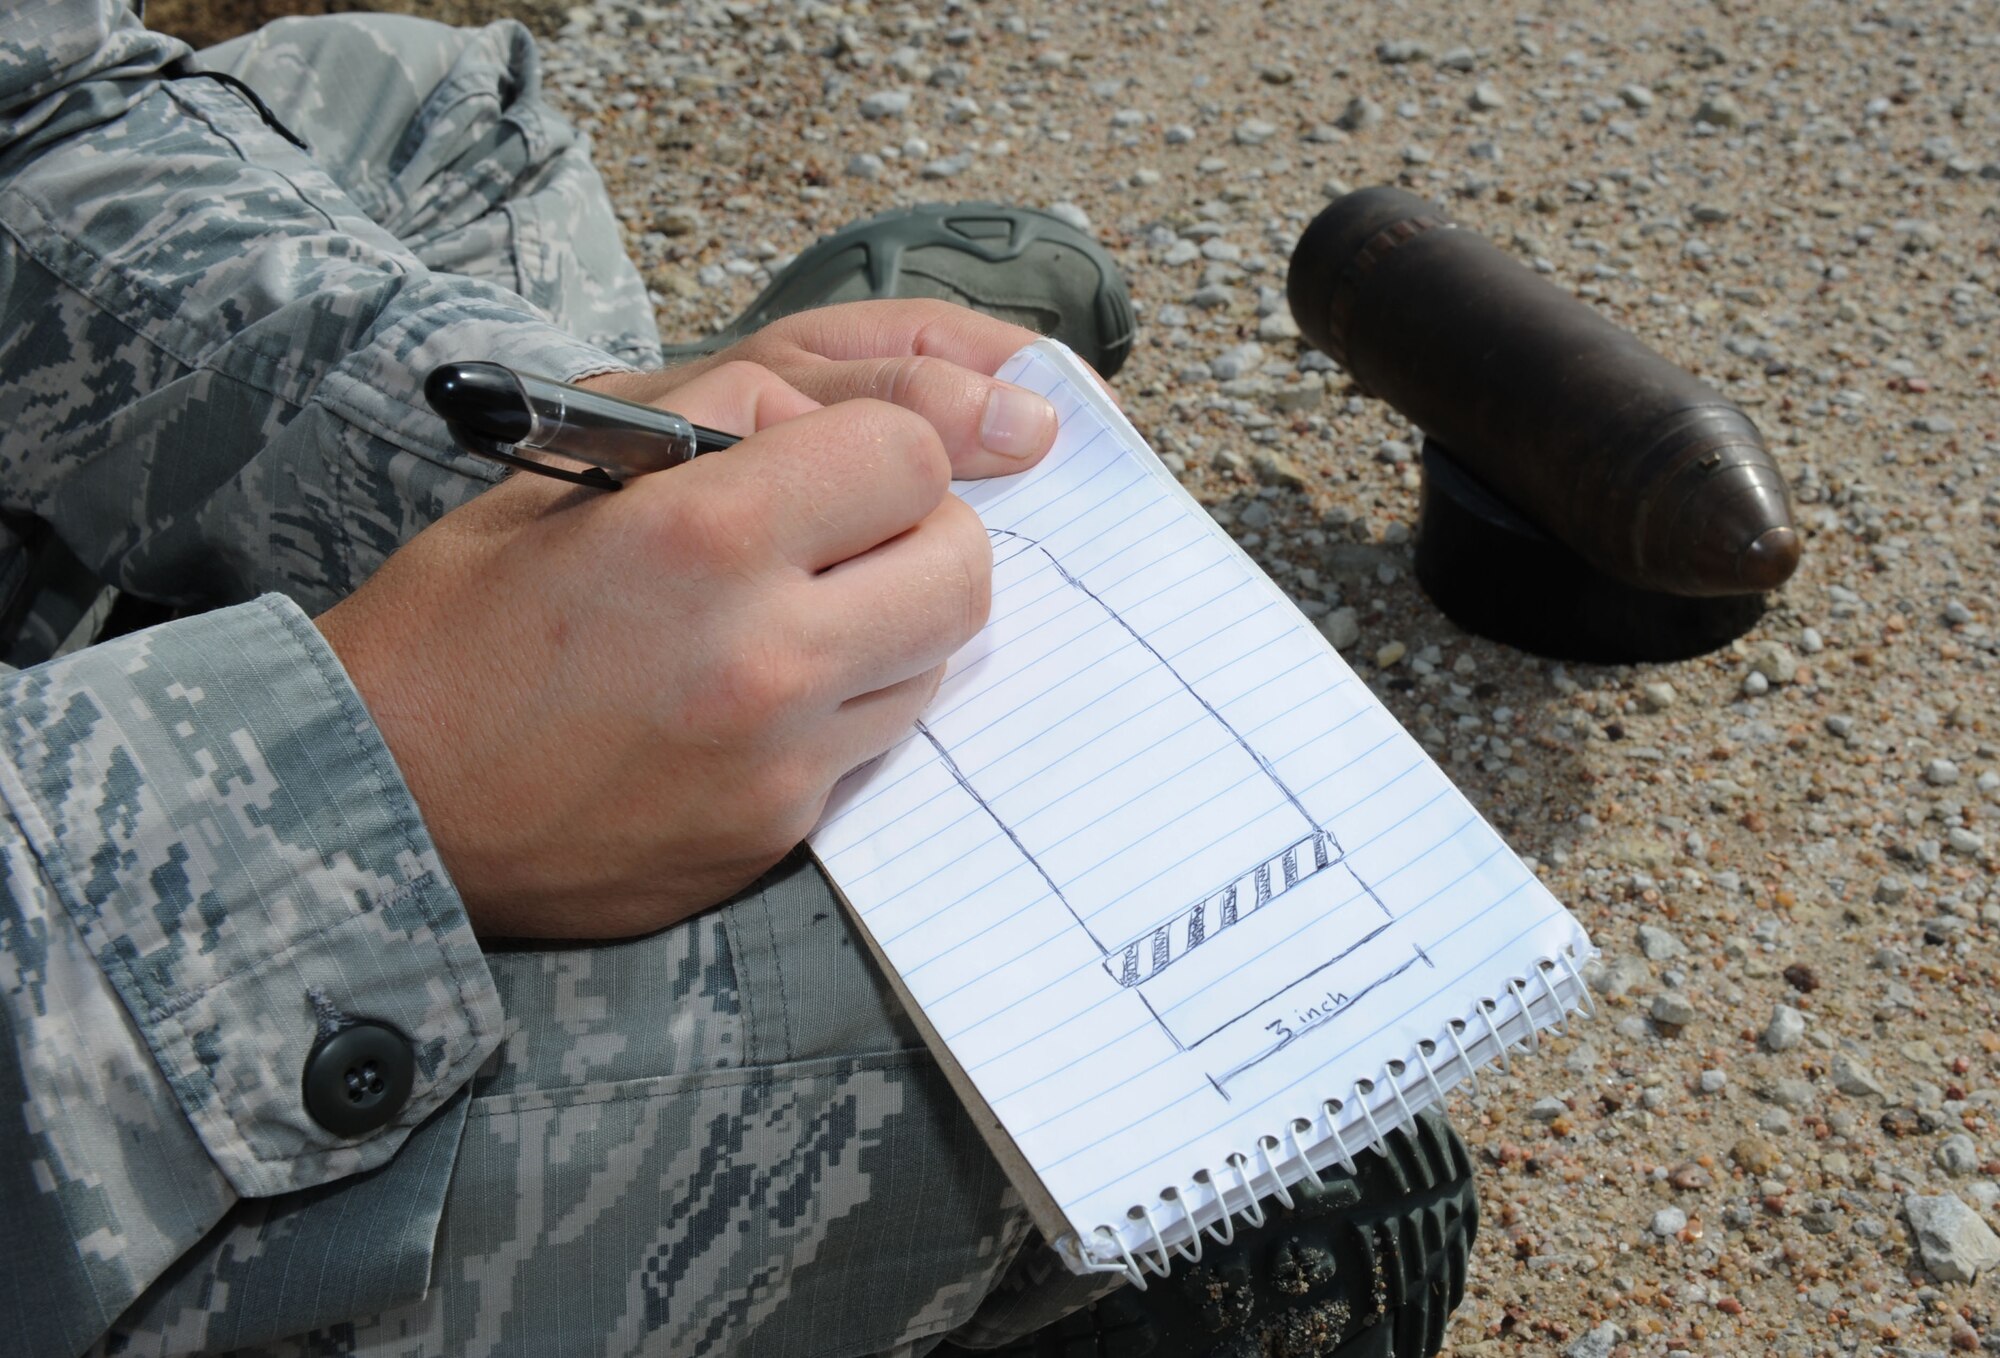 Staff Sgt. James Burnett, 22nd Civil Engineer Squadron explosive ordnance disposal technician, sketches a World War I-era artillery projectile Aug. 8, 2016, in Marion County, Kan. Burnett helped the Marion County Sherriff’s Department identify and dispose of the ordnance. (U.S. Air Force photo/Senior Airman Tara Fadenrecht)